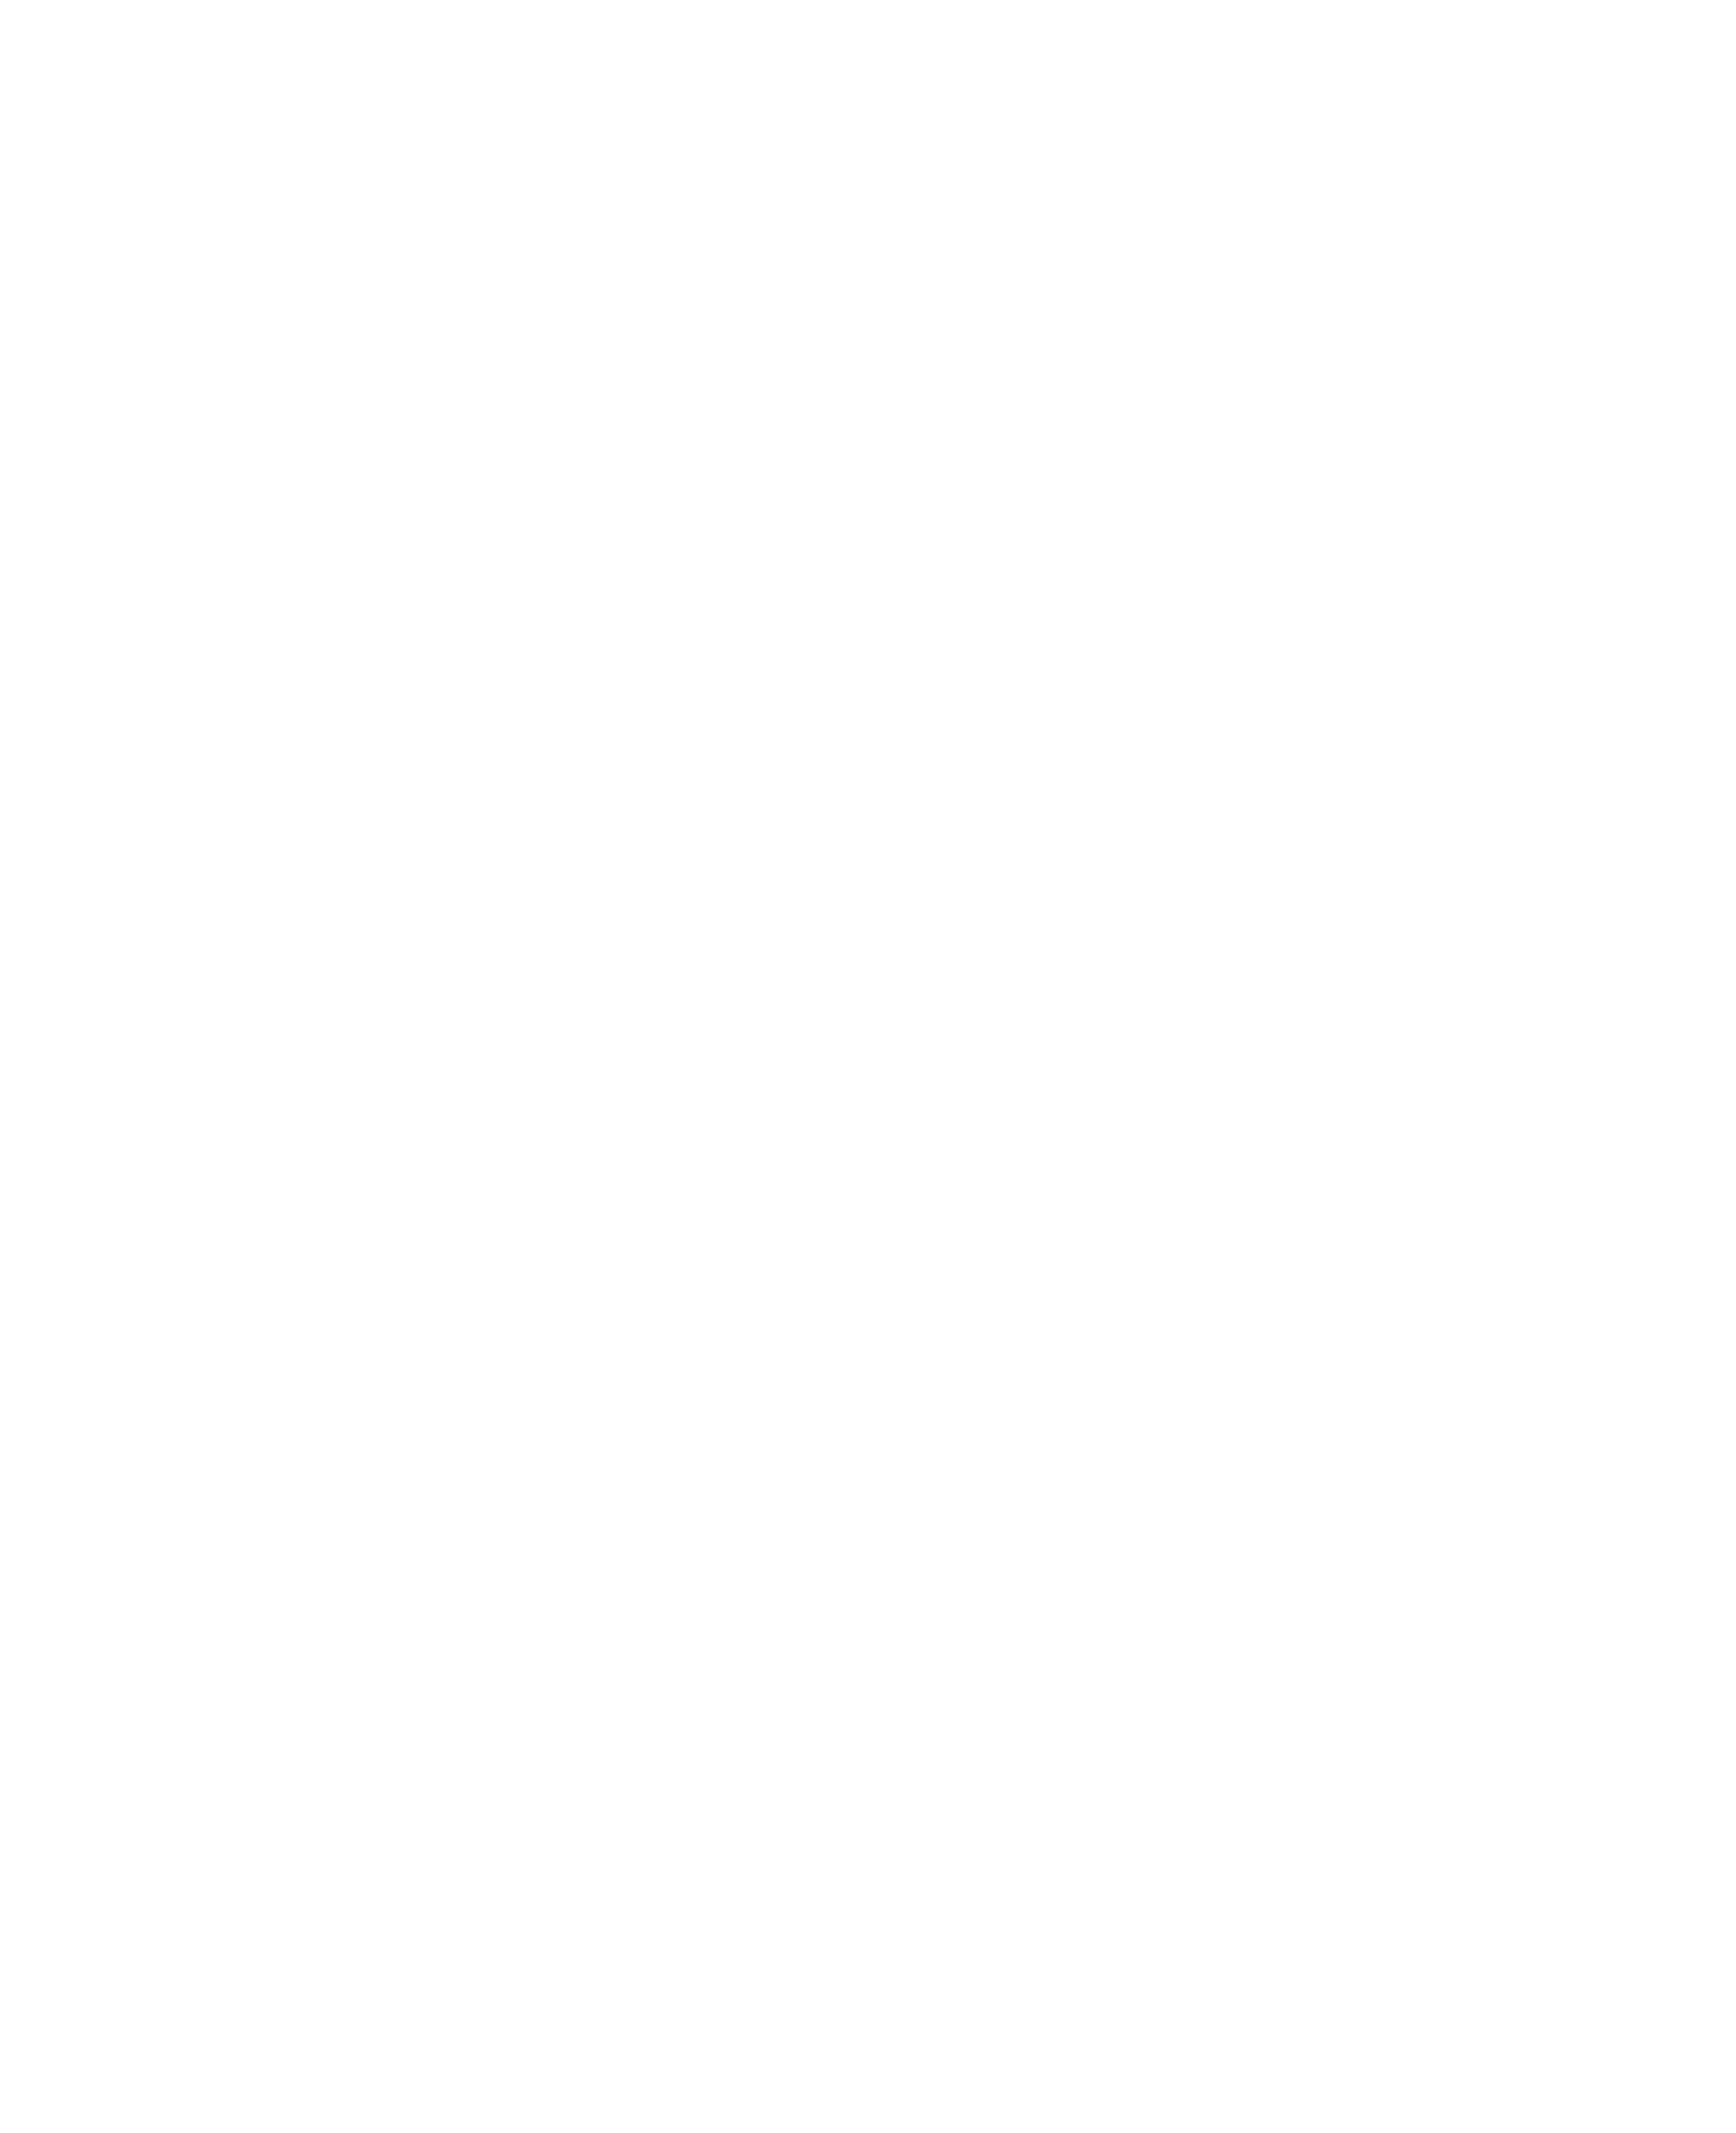 Clef PNG Transparent Picture